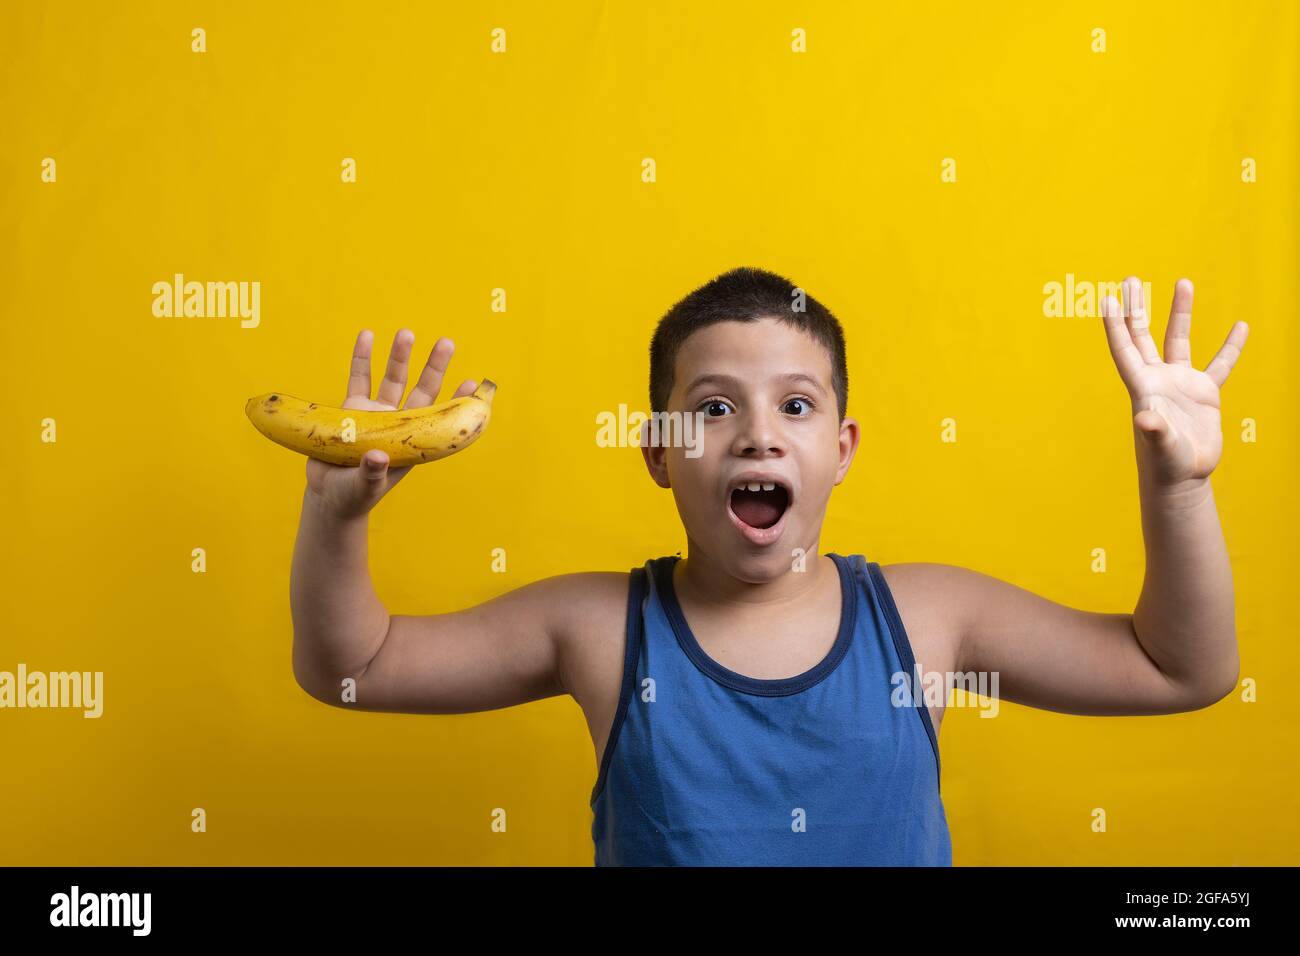 Amazed Hispanic boy with a banana in hand isolated on a yellow background Stock Photo